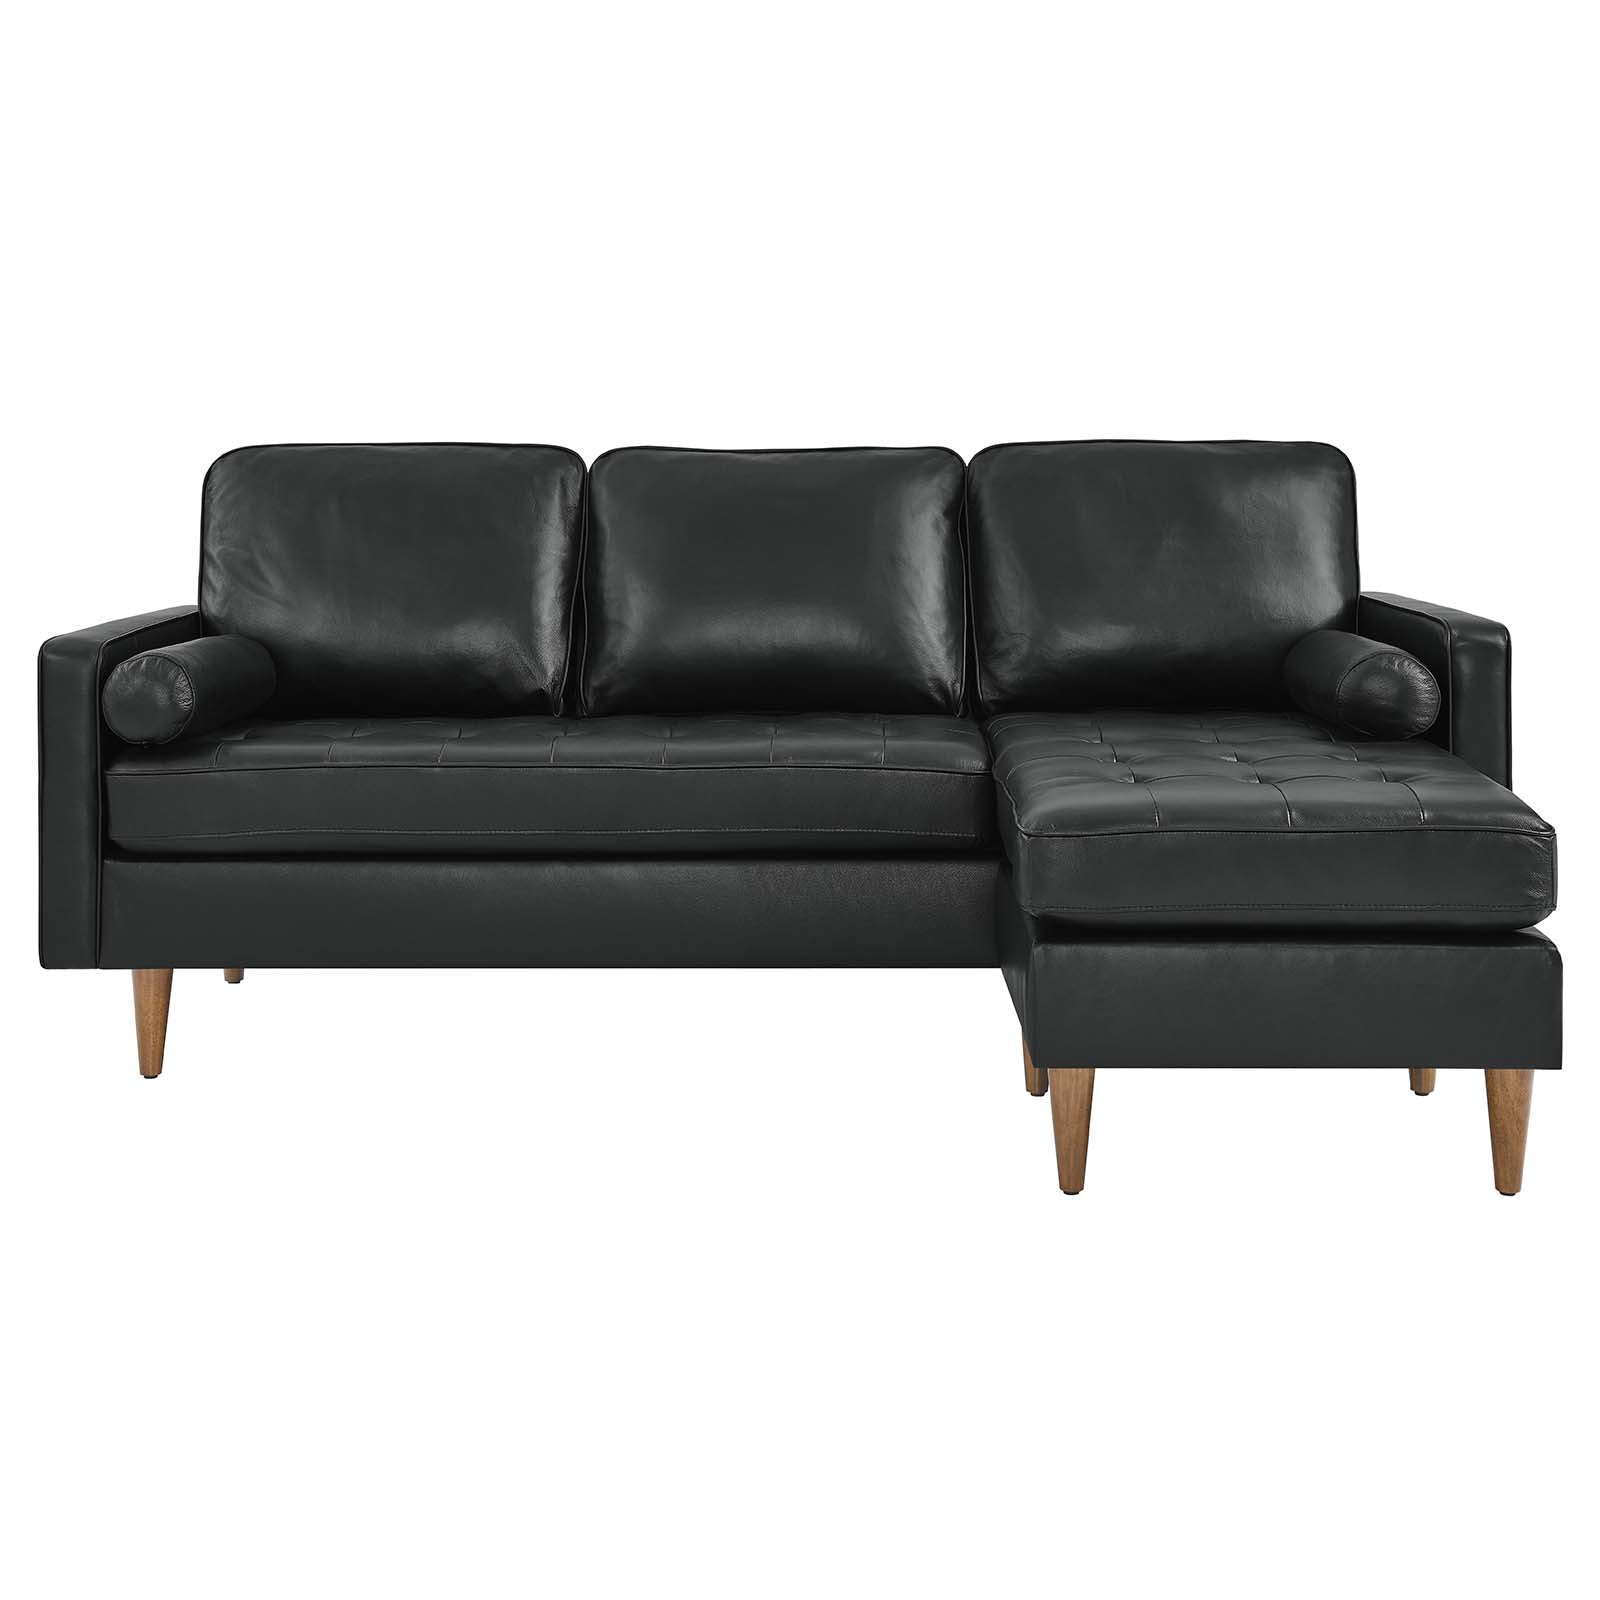 Valour 78" Leather Apartment Sectional Sofa - East Shore Modern Home Furnishings